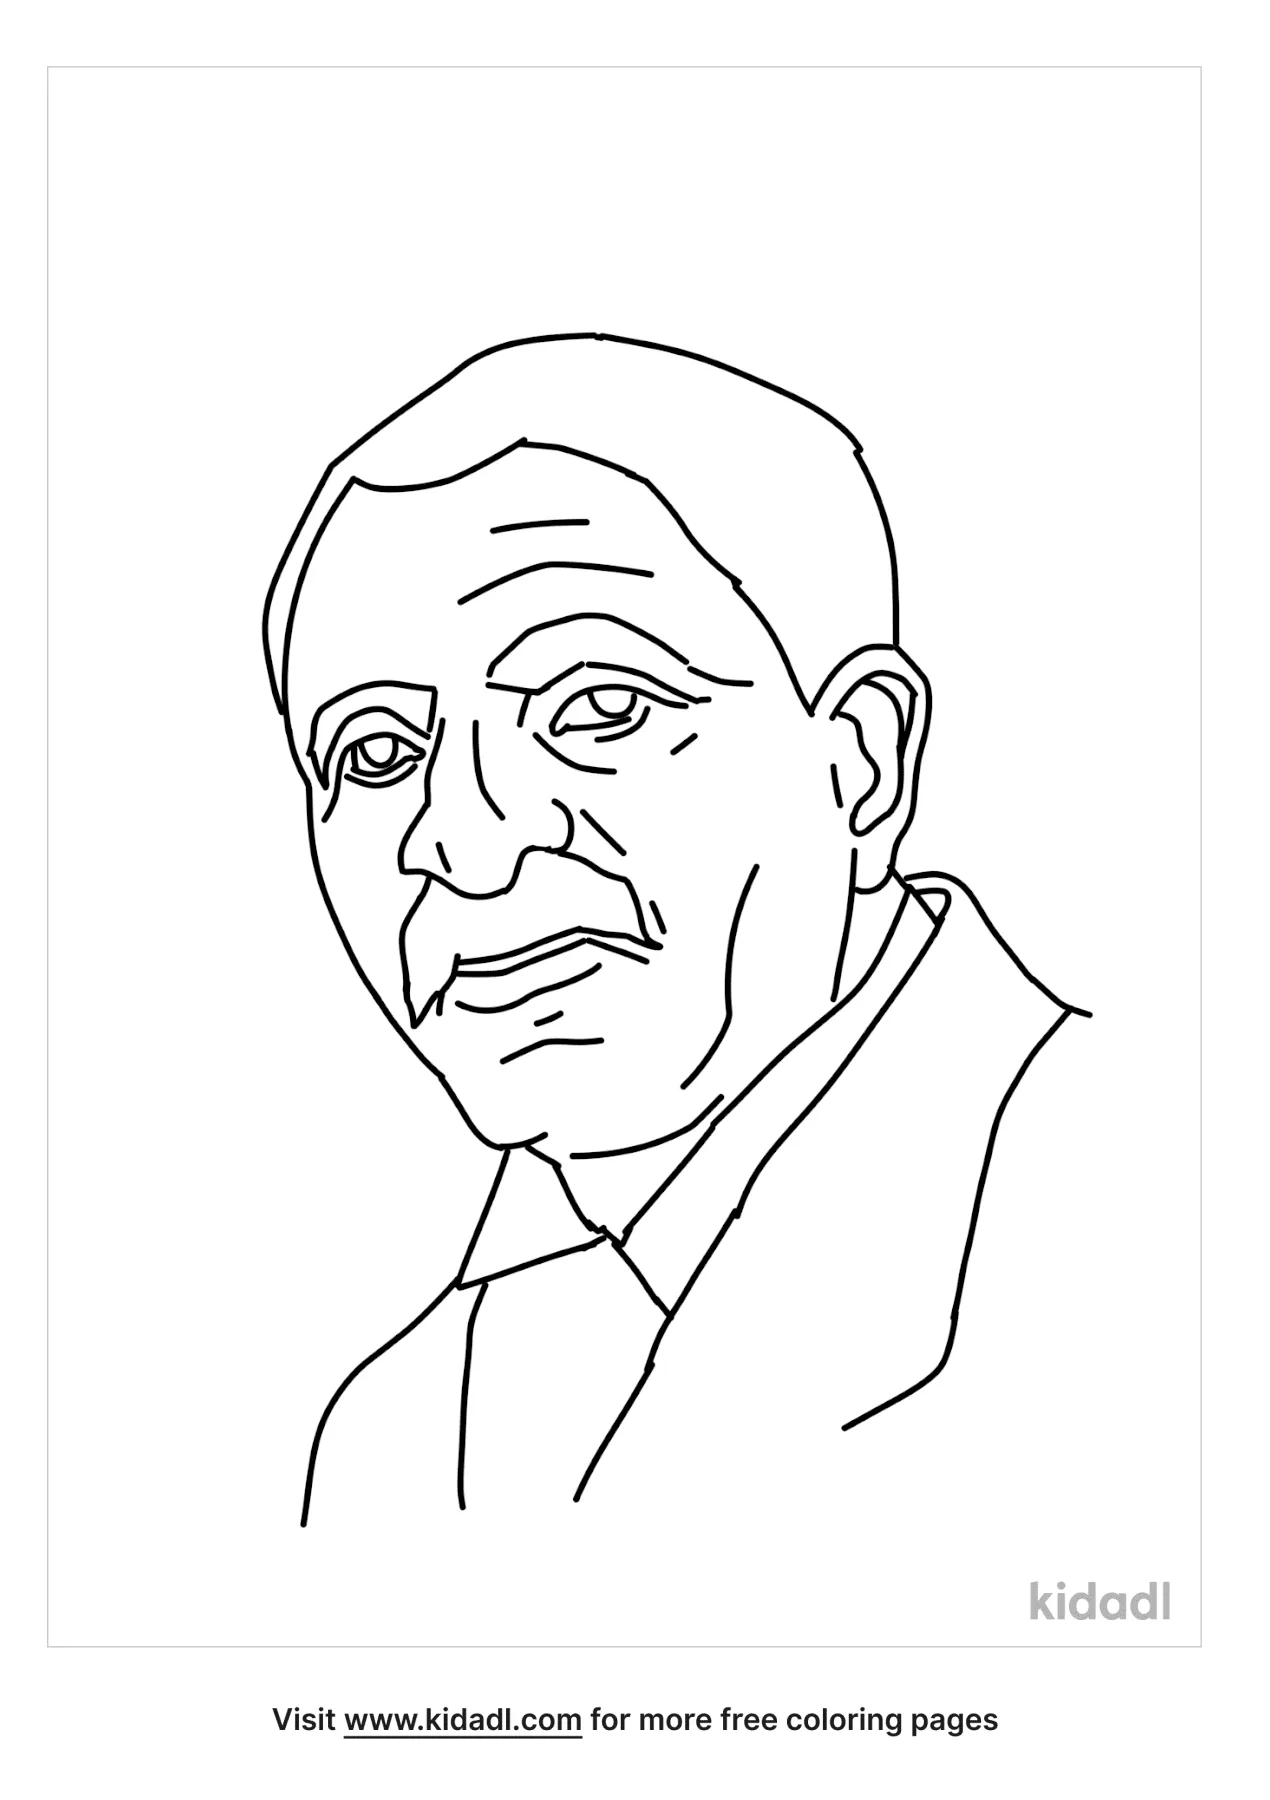 Free george washington carver coloring page coloring page printables